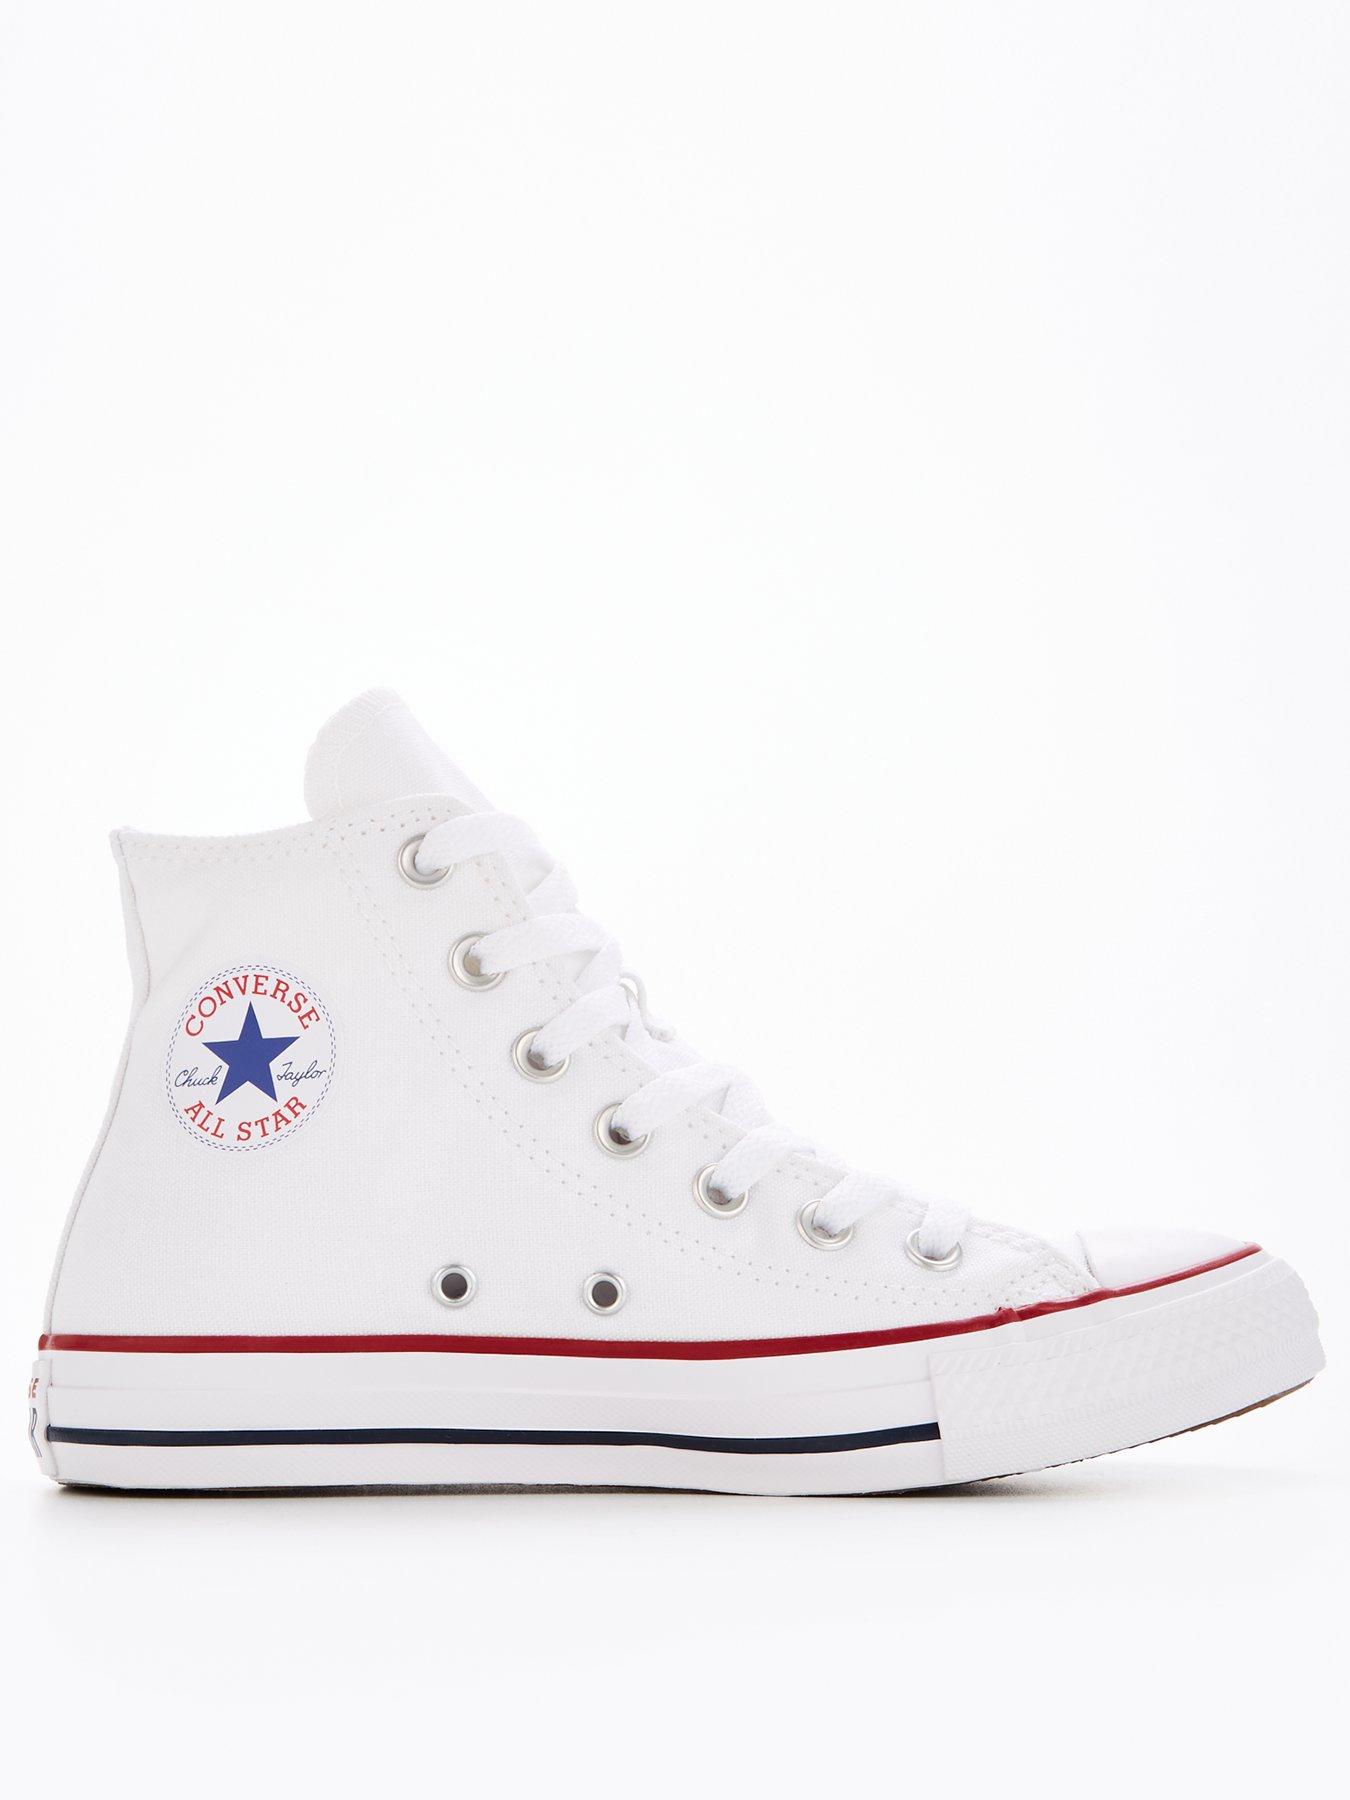 Converse Chuck Taylor All Star Hi Wide Fit - White | very.co.uk